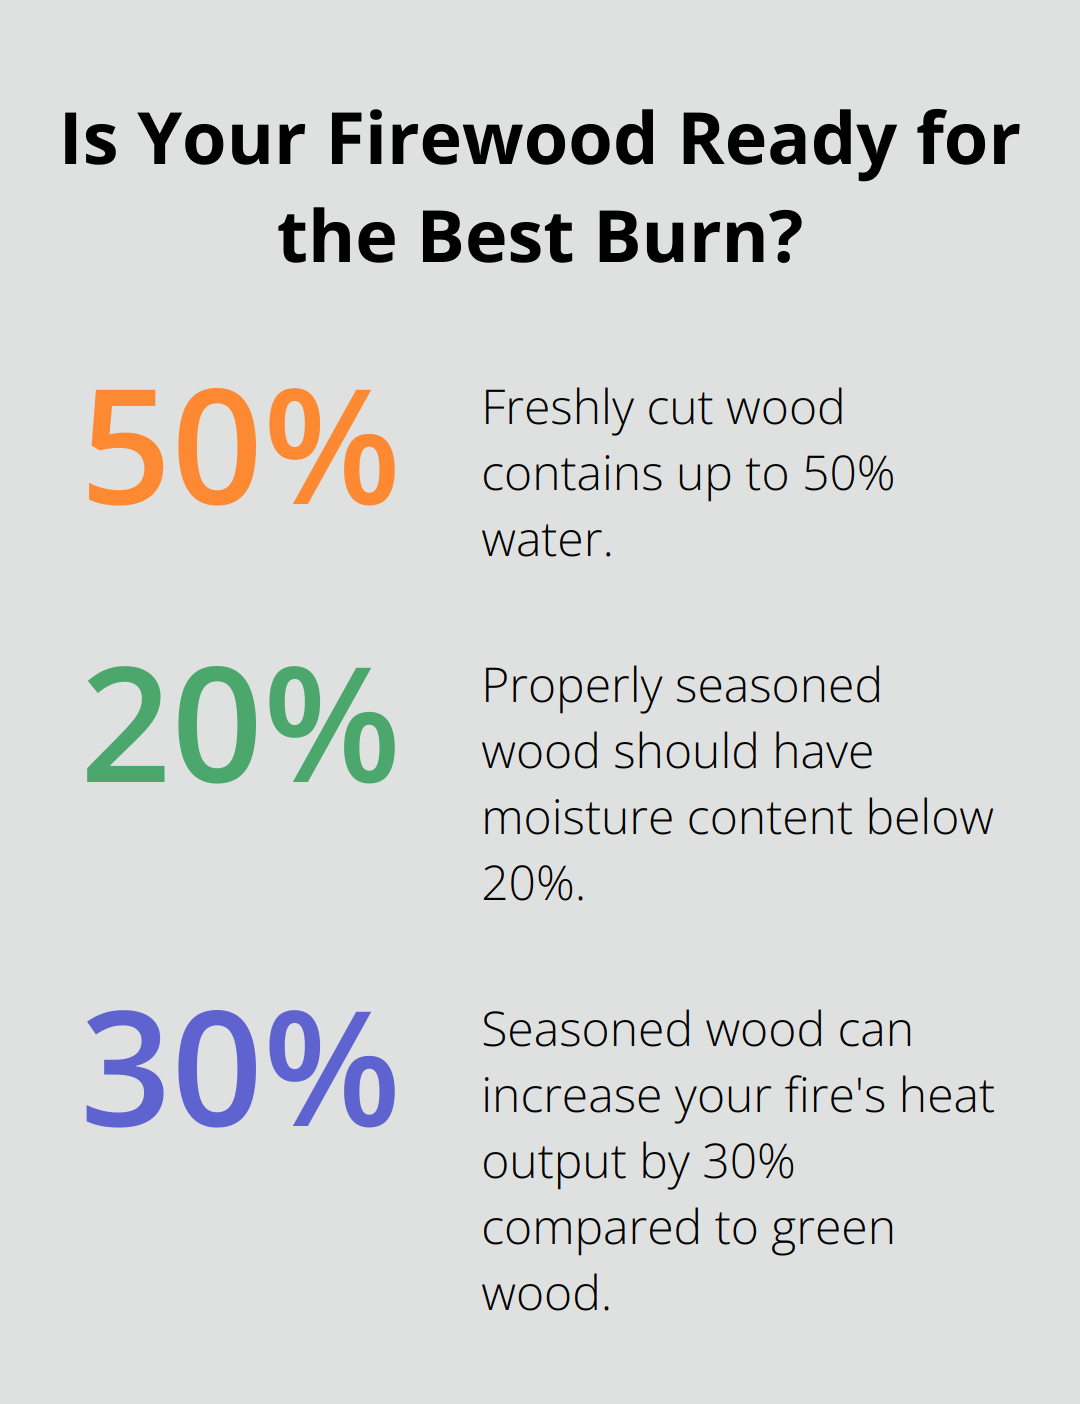 Fact - Is Your Firewood Ready for the Best Burn?